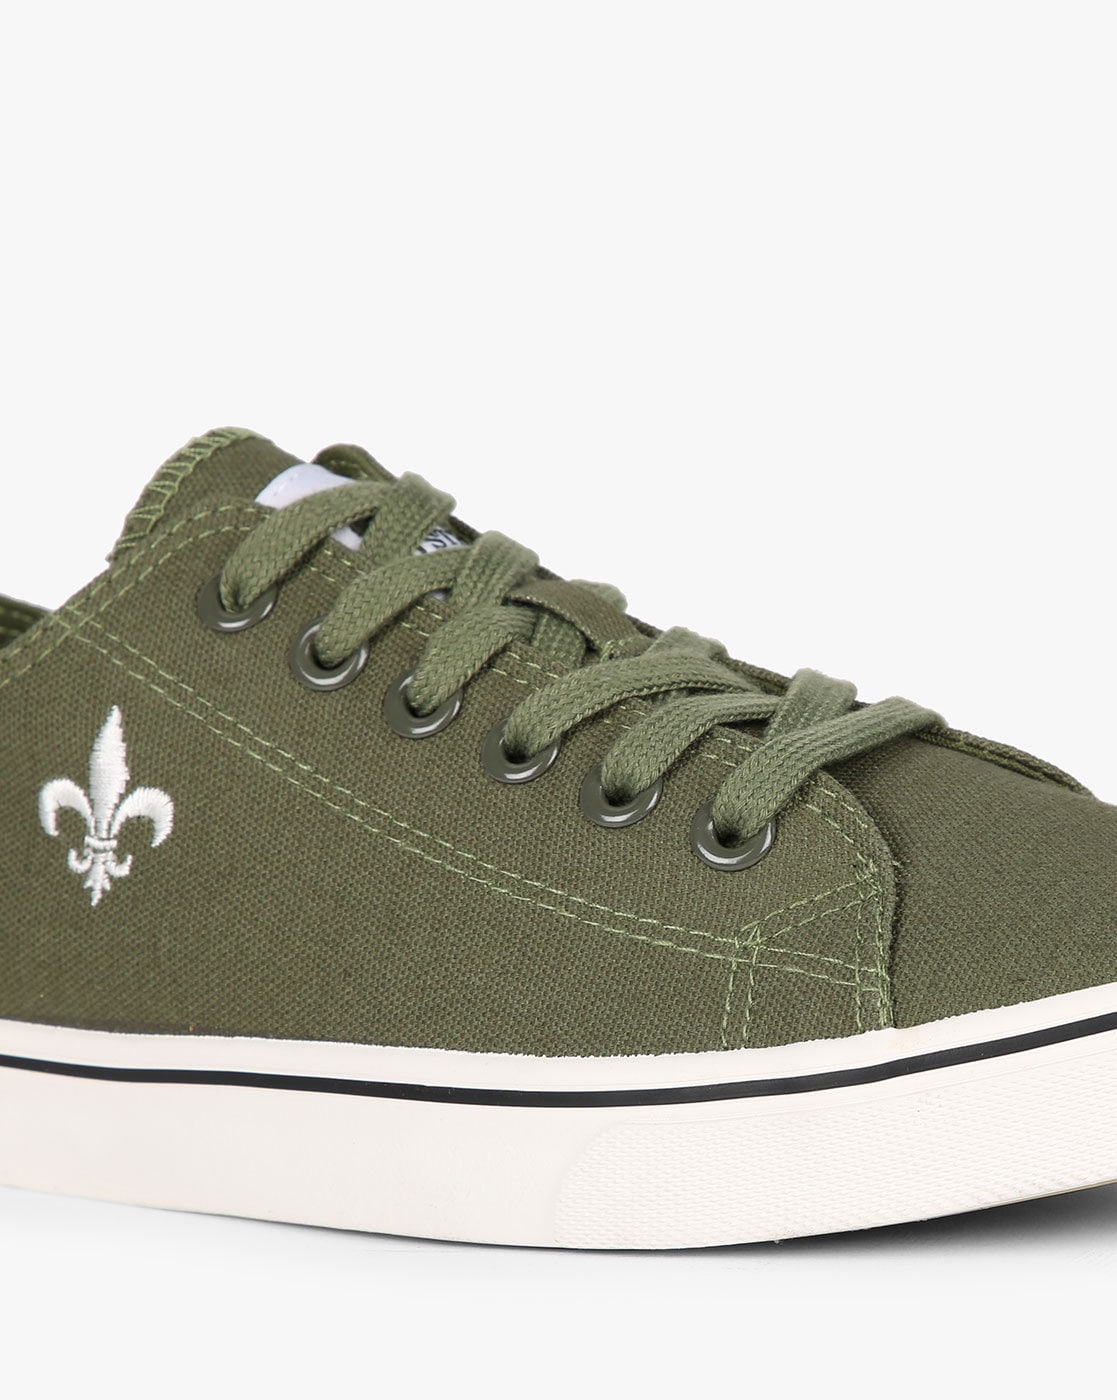 red tape olive green sneakers